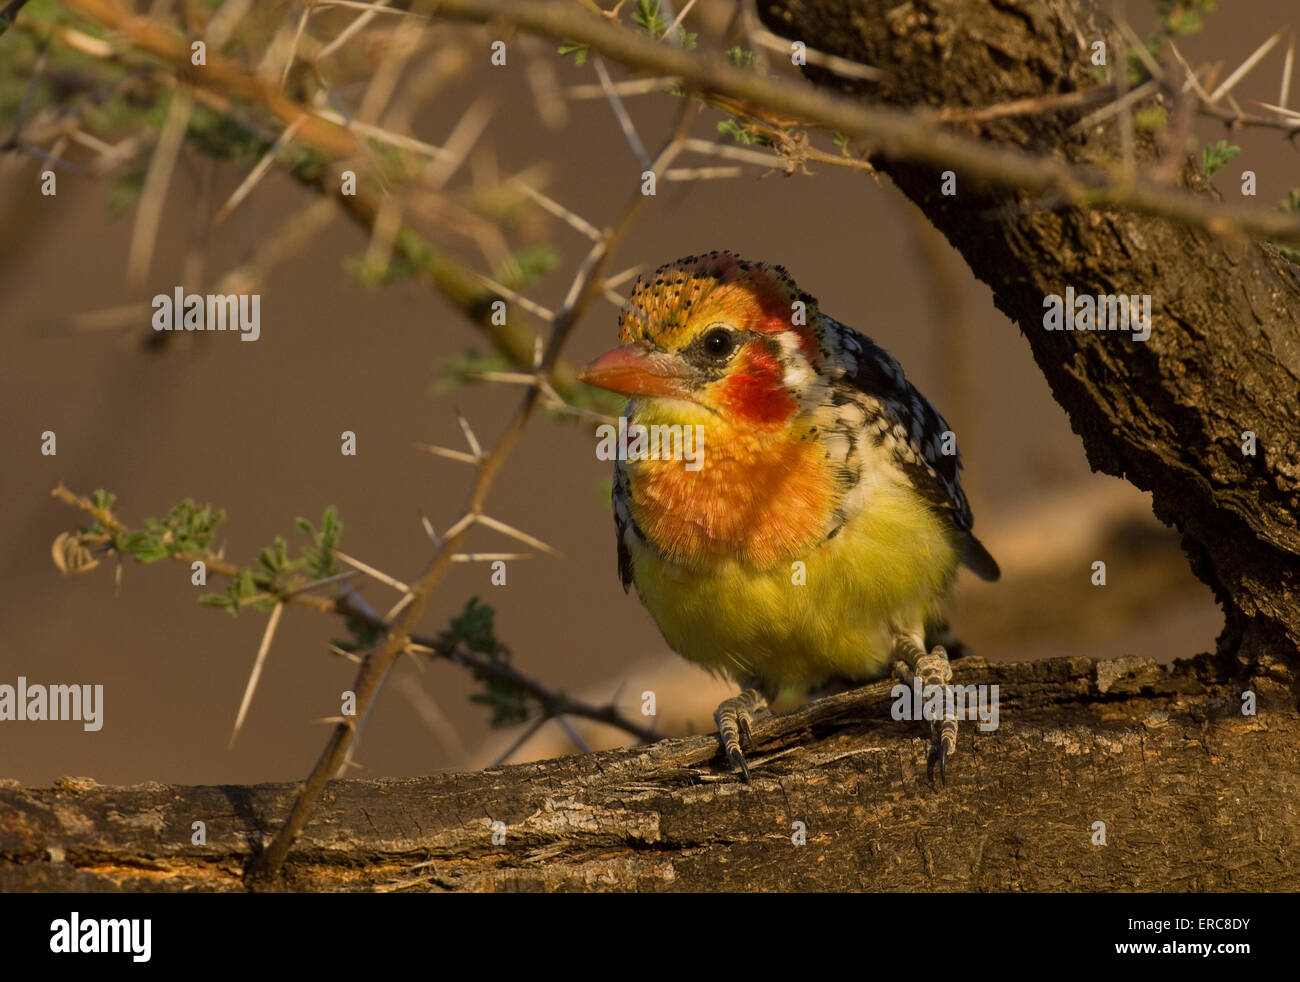 RED-AND-YELLOW BARBET ON A TREE BRANCH Stock Photo